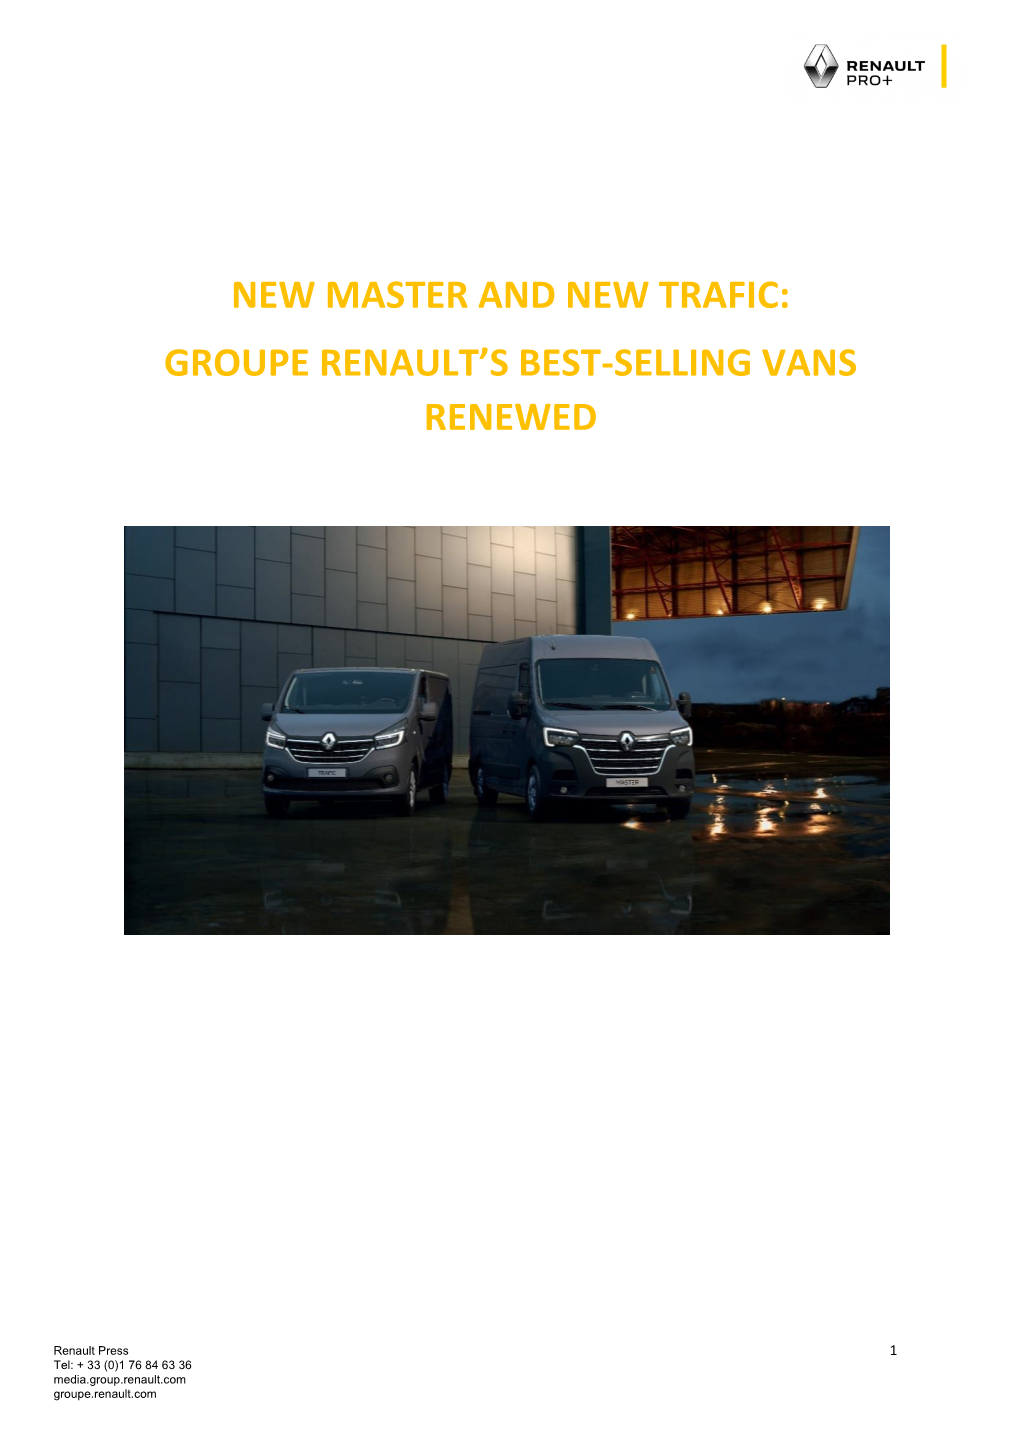 New Master and New Trafic: Groupe Renault's Best